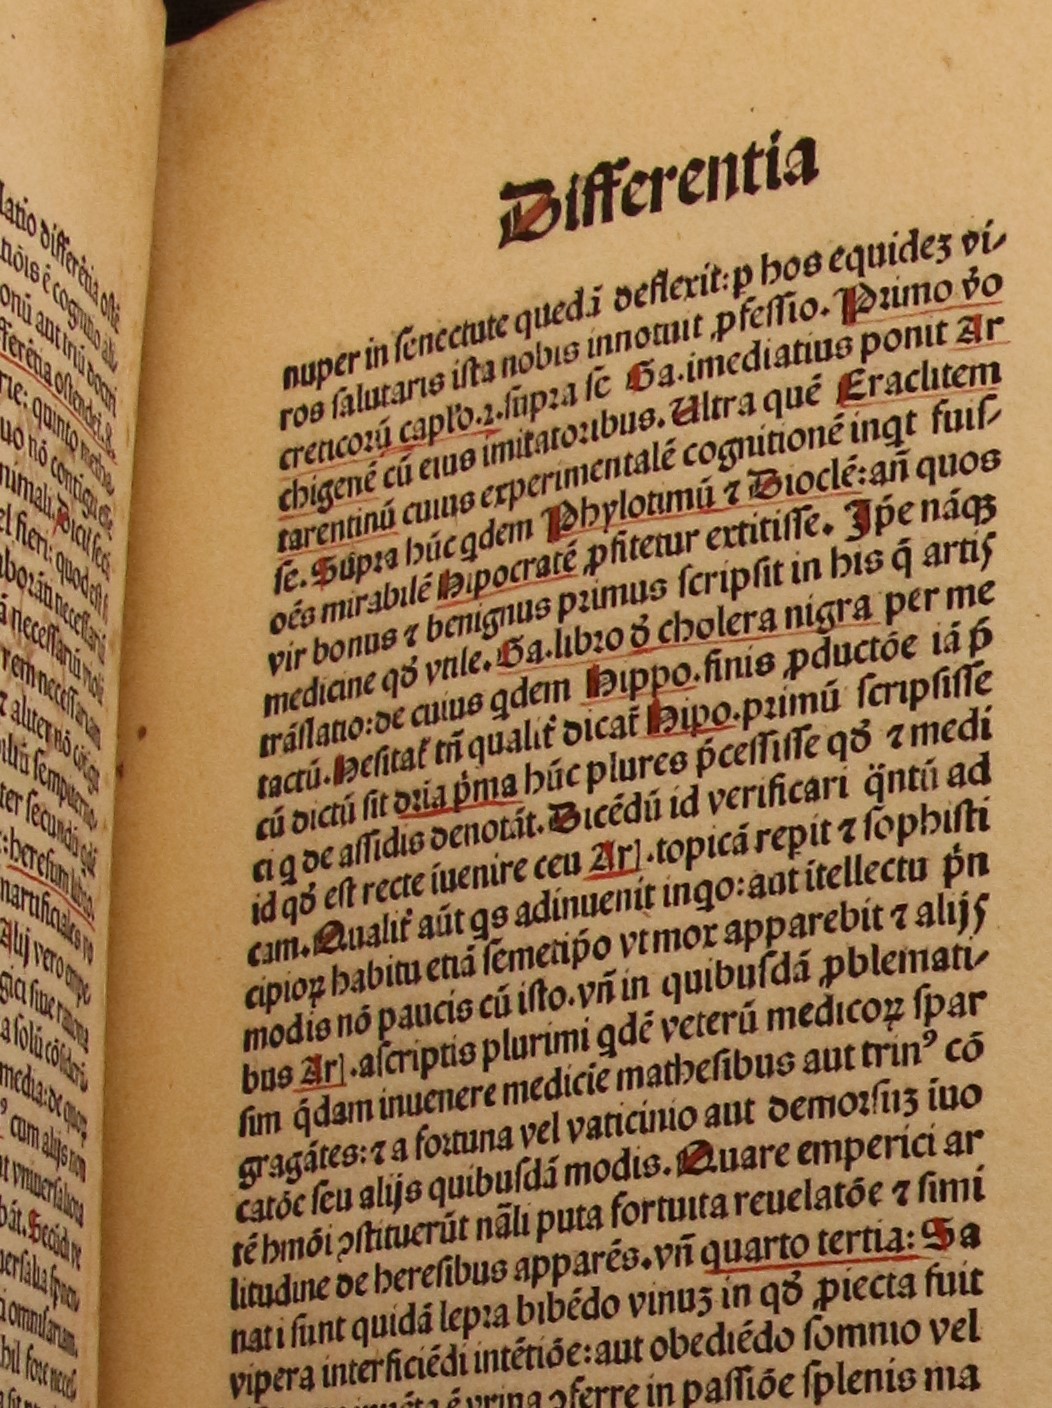 Ill. 7: The copy of the works by Petrus de Abano at the University of Groningen Library